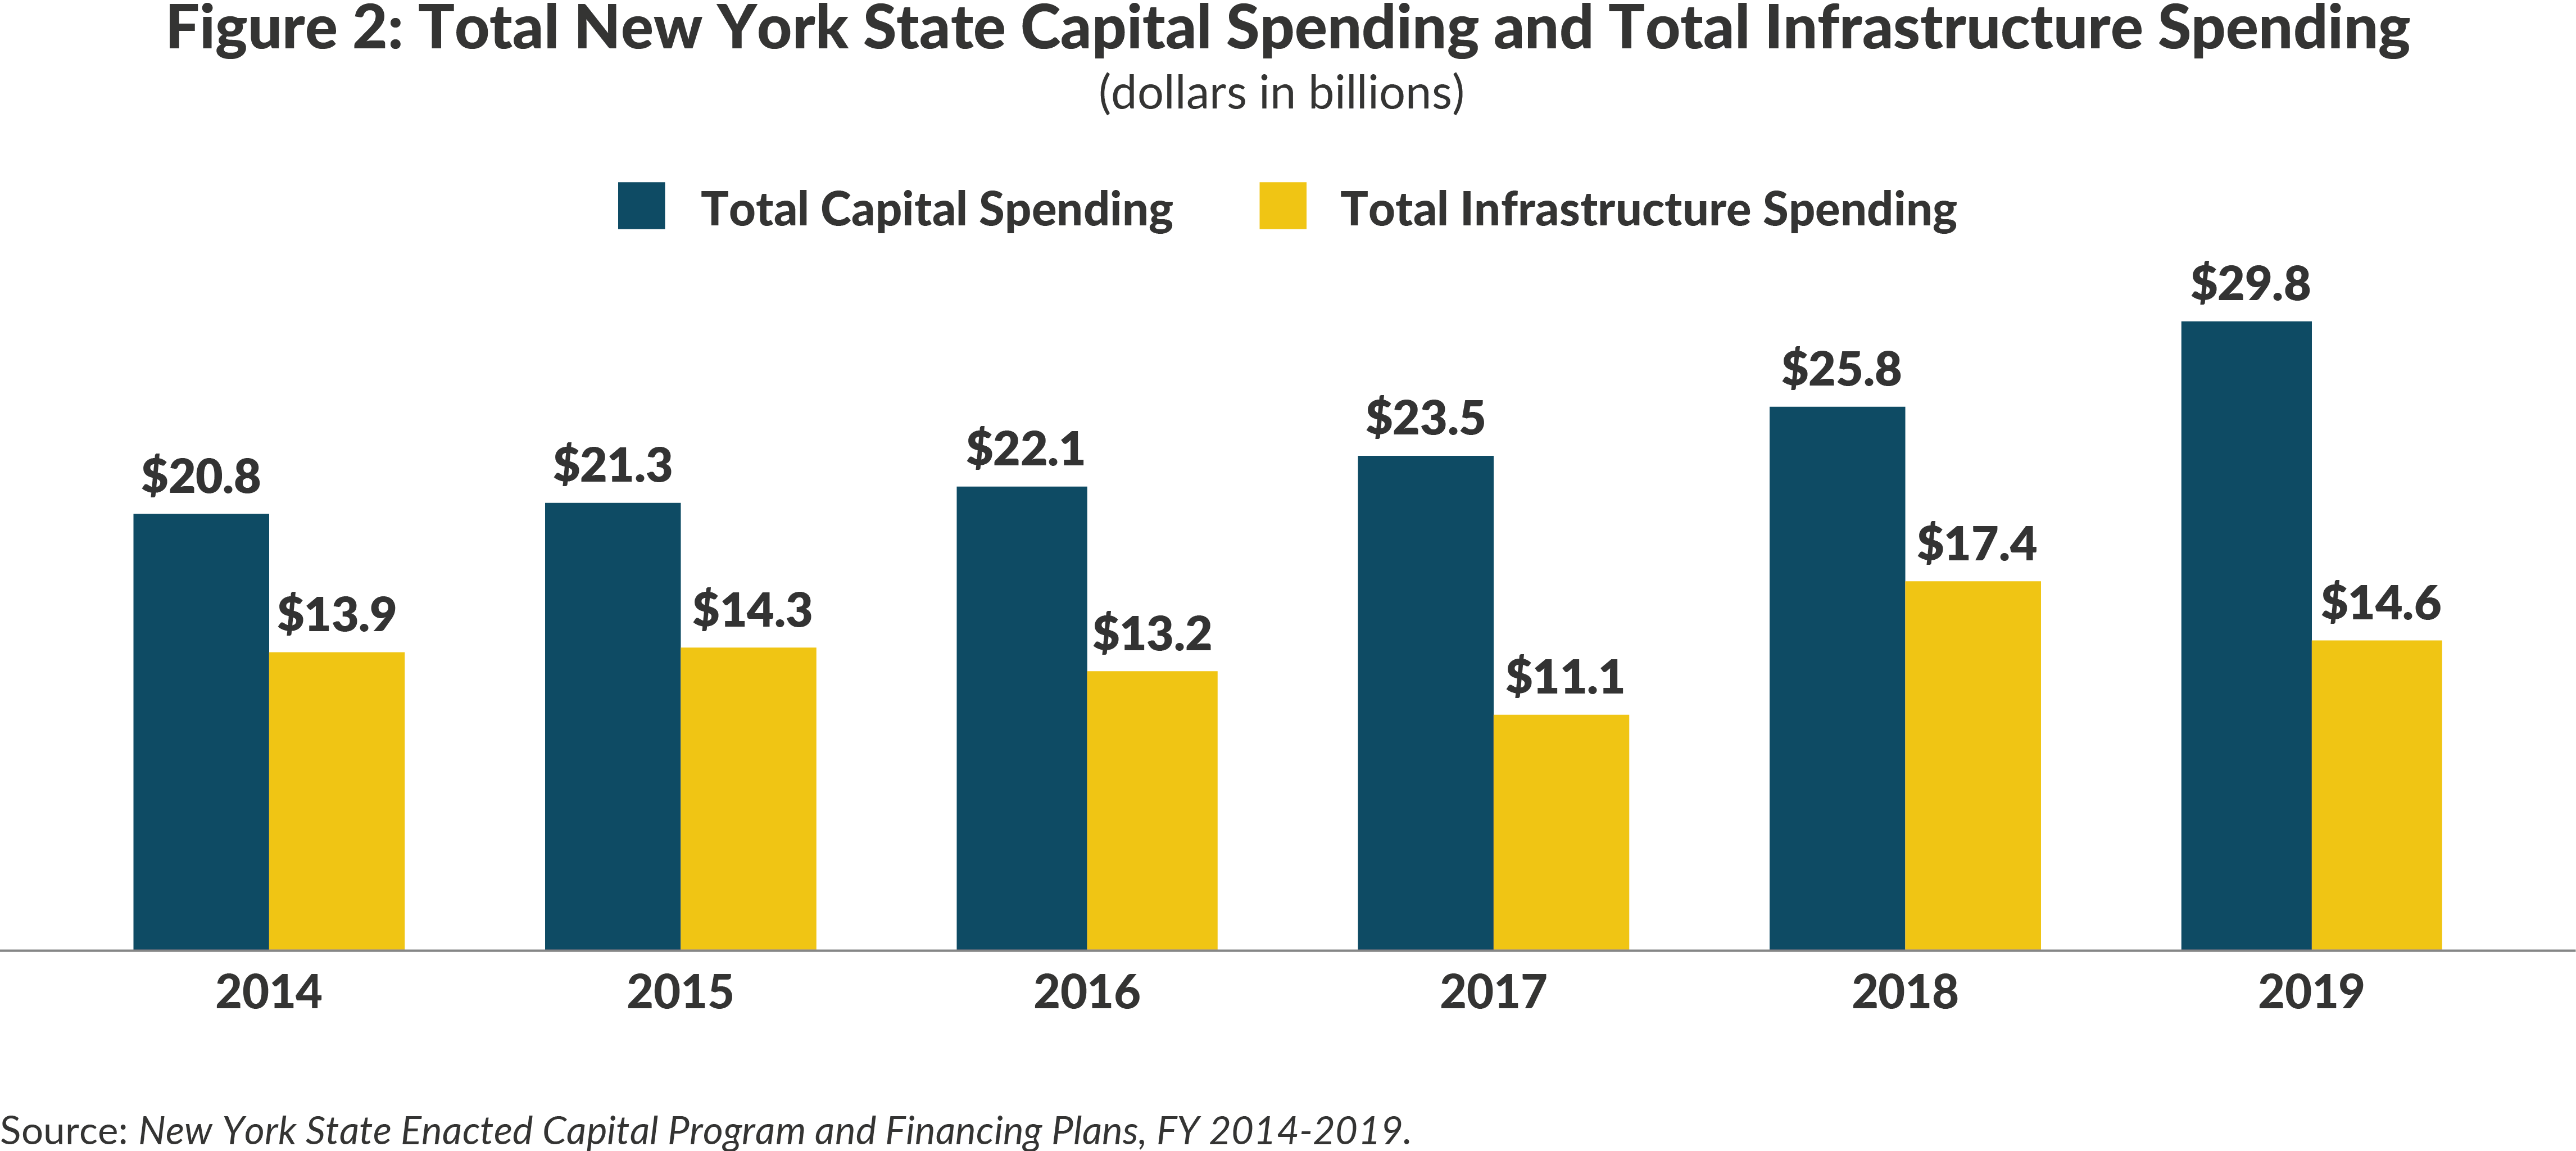 Figure 2: Total New York State Capital Spending and Total Infrastructure Spending